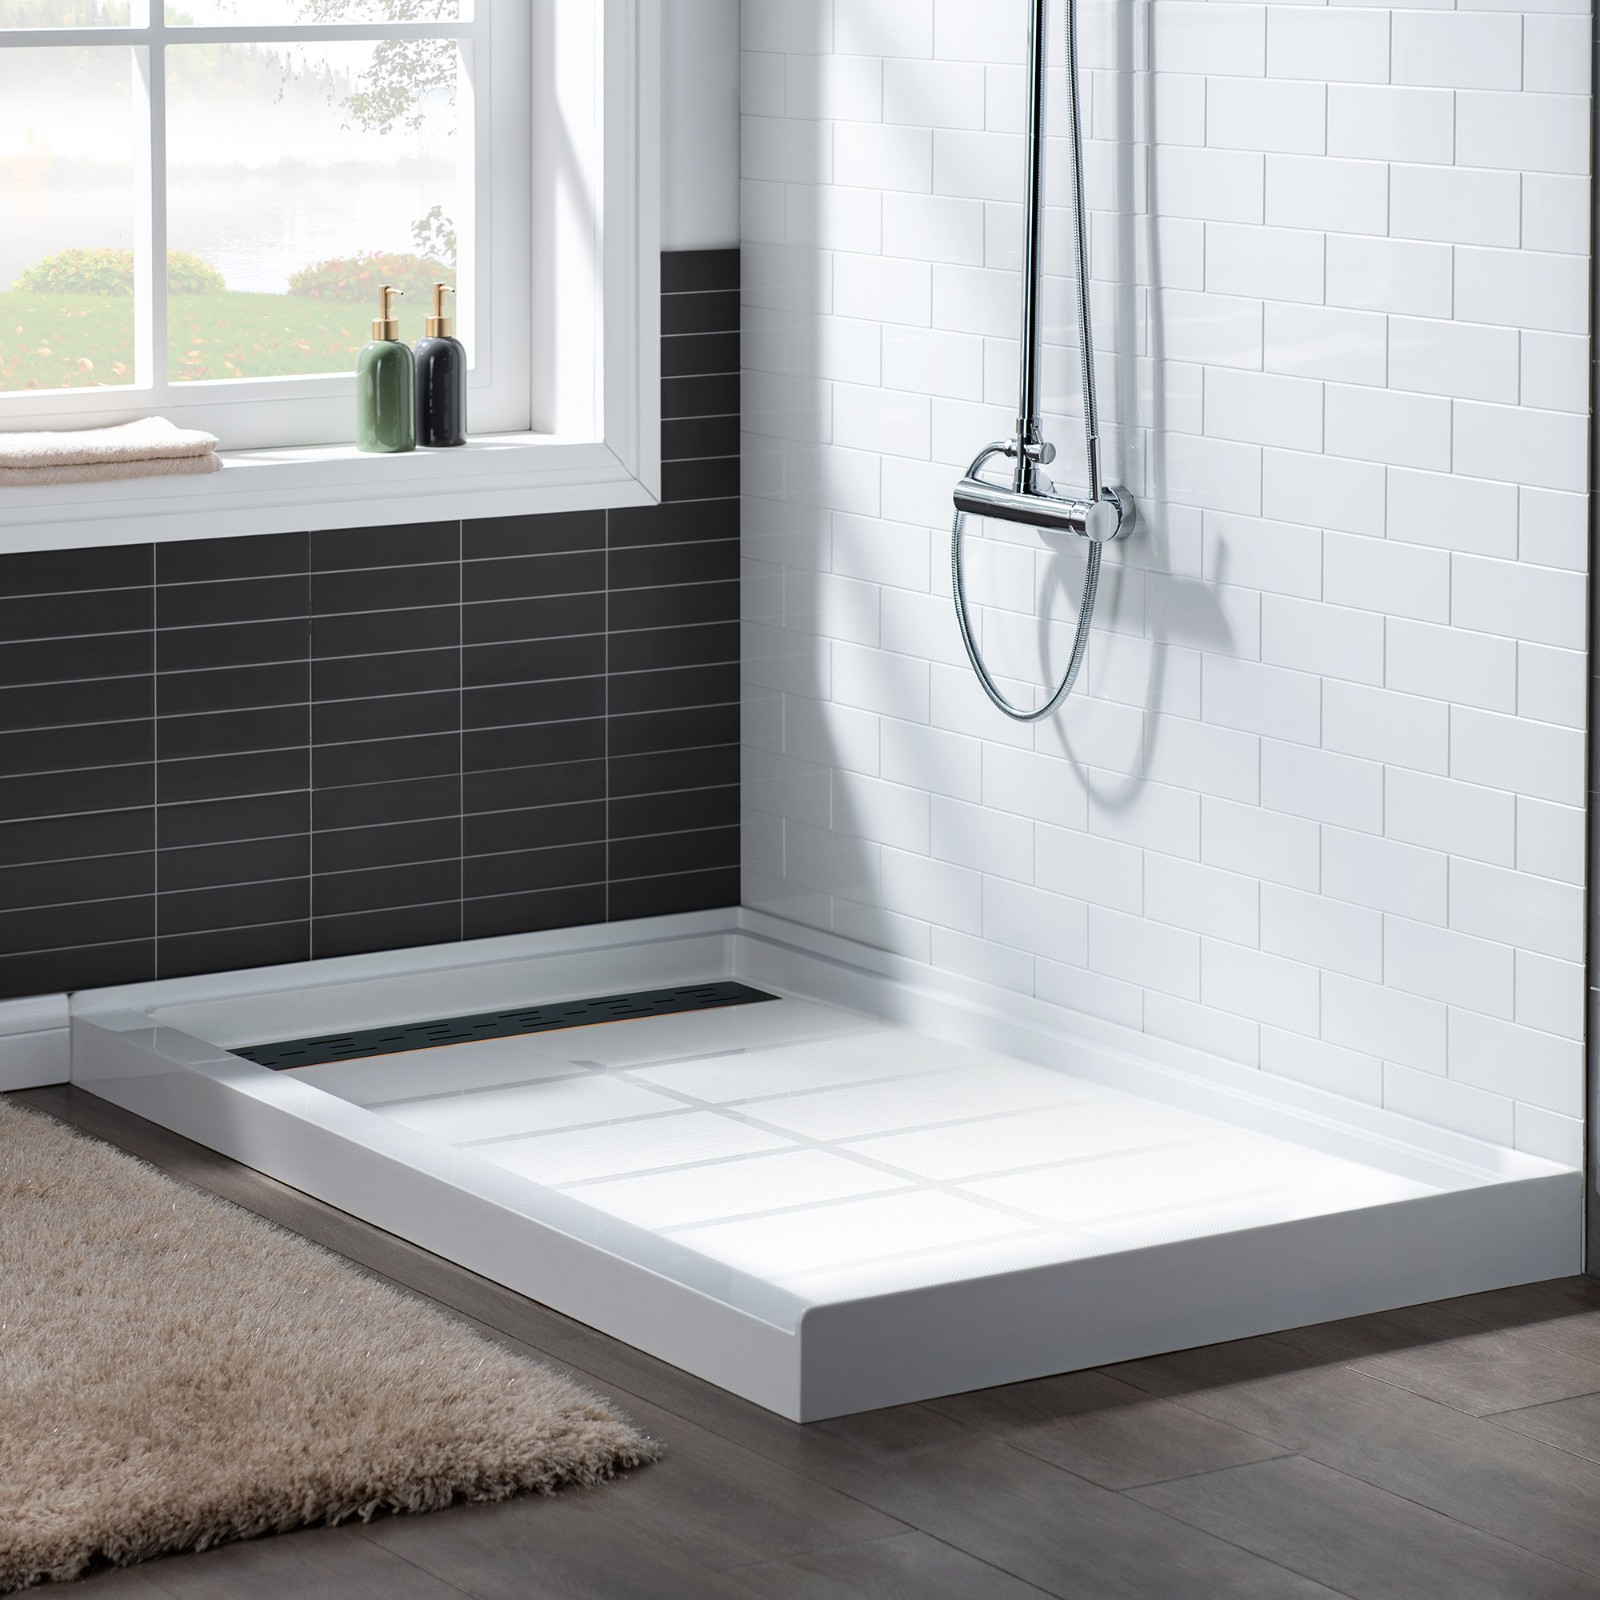  WOODBRIDGE SBR6034-1000L-ORB SolidSurface Shower Base with Recessed Trench Side Including Oil Rubbed Bronze Linear Cover, 60